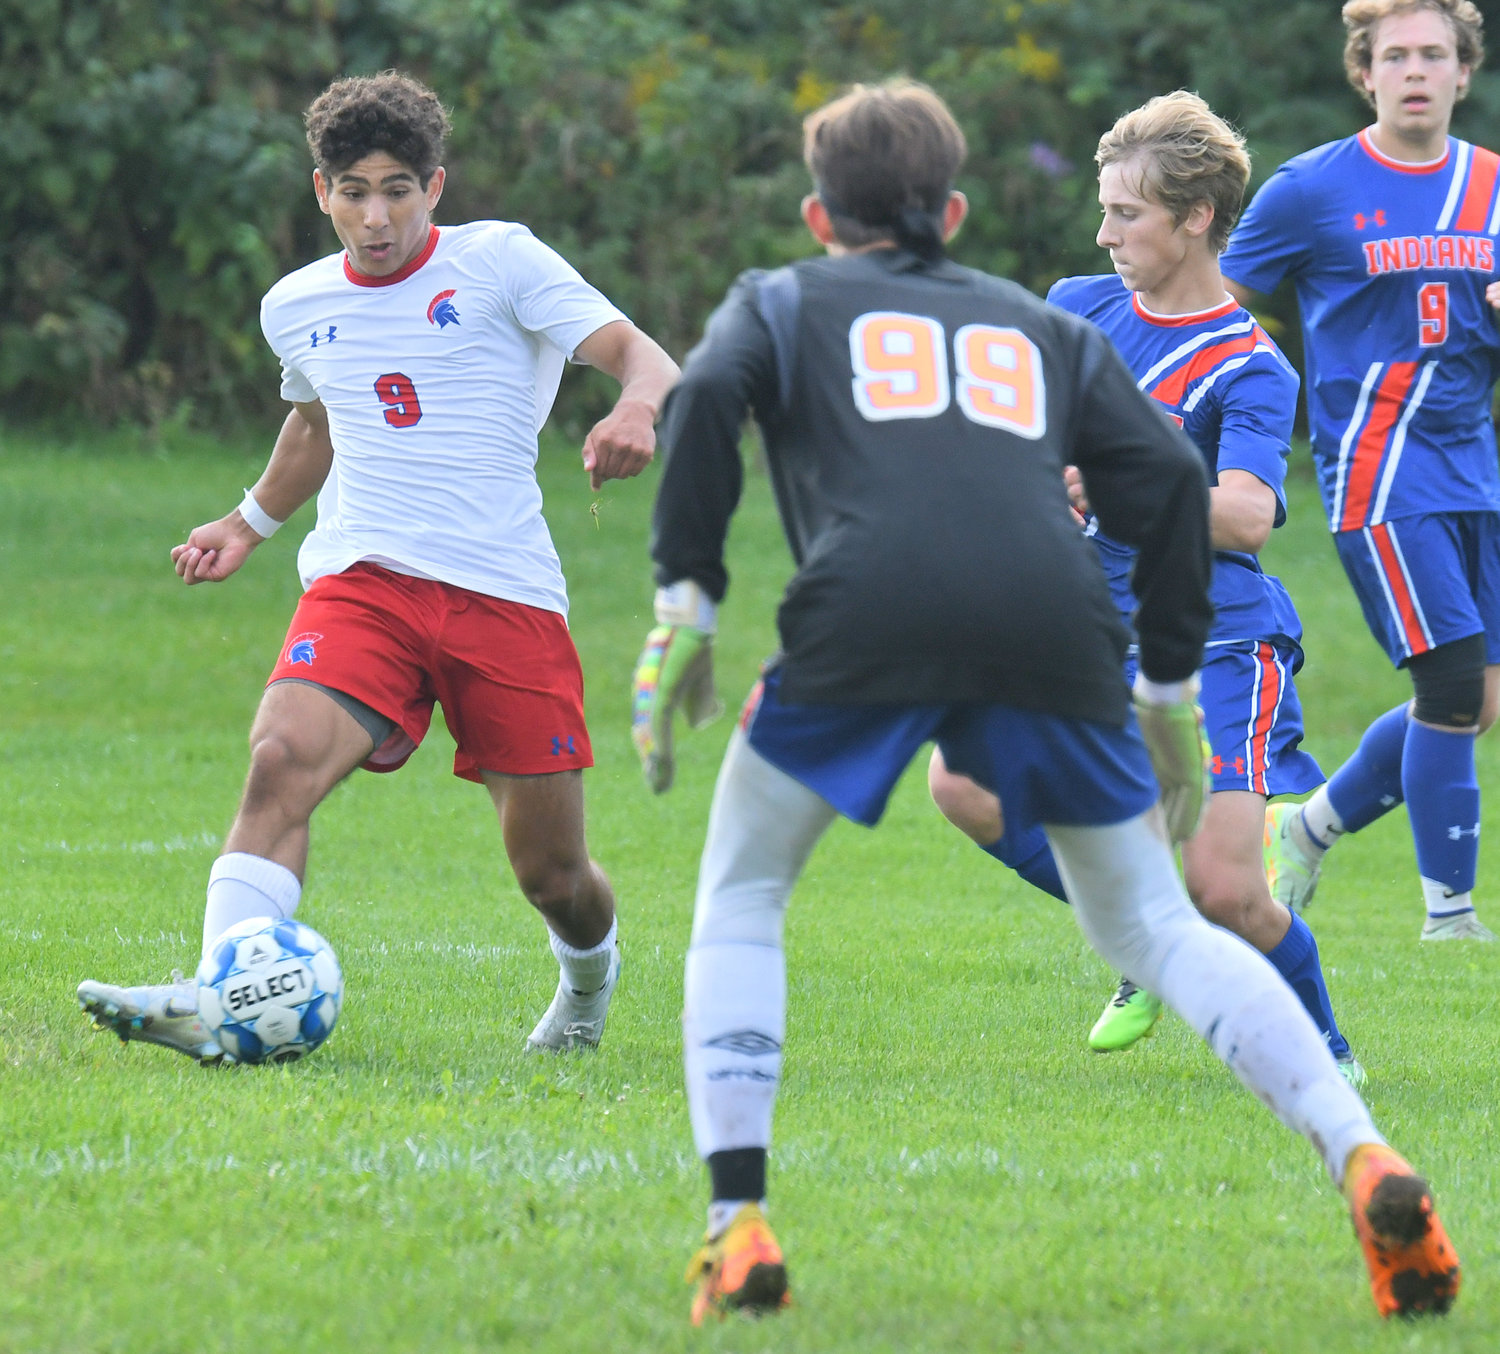 New Hartford’s Aly Radwan looks to center the ball with Oneida goaltender Kannon Curro and Onieda player Cash Kistner looking to stop the play. New Hartford won the Tri-Valley League match on the road Tuesday 6-1. Curro made 14 saves.